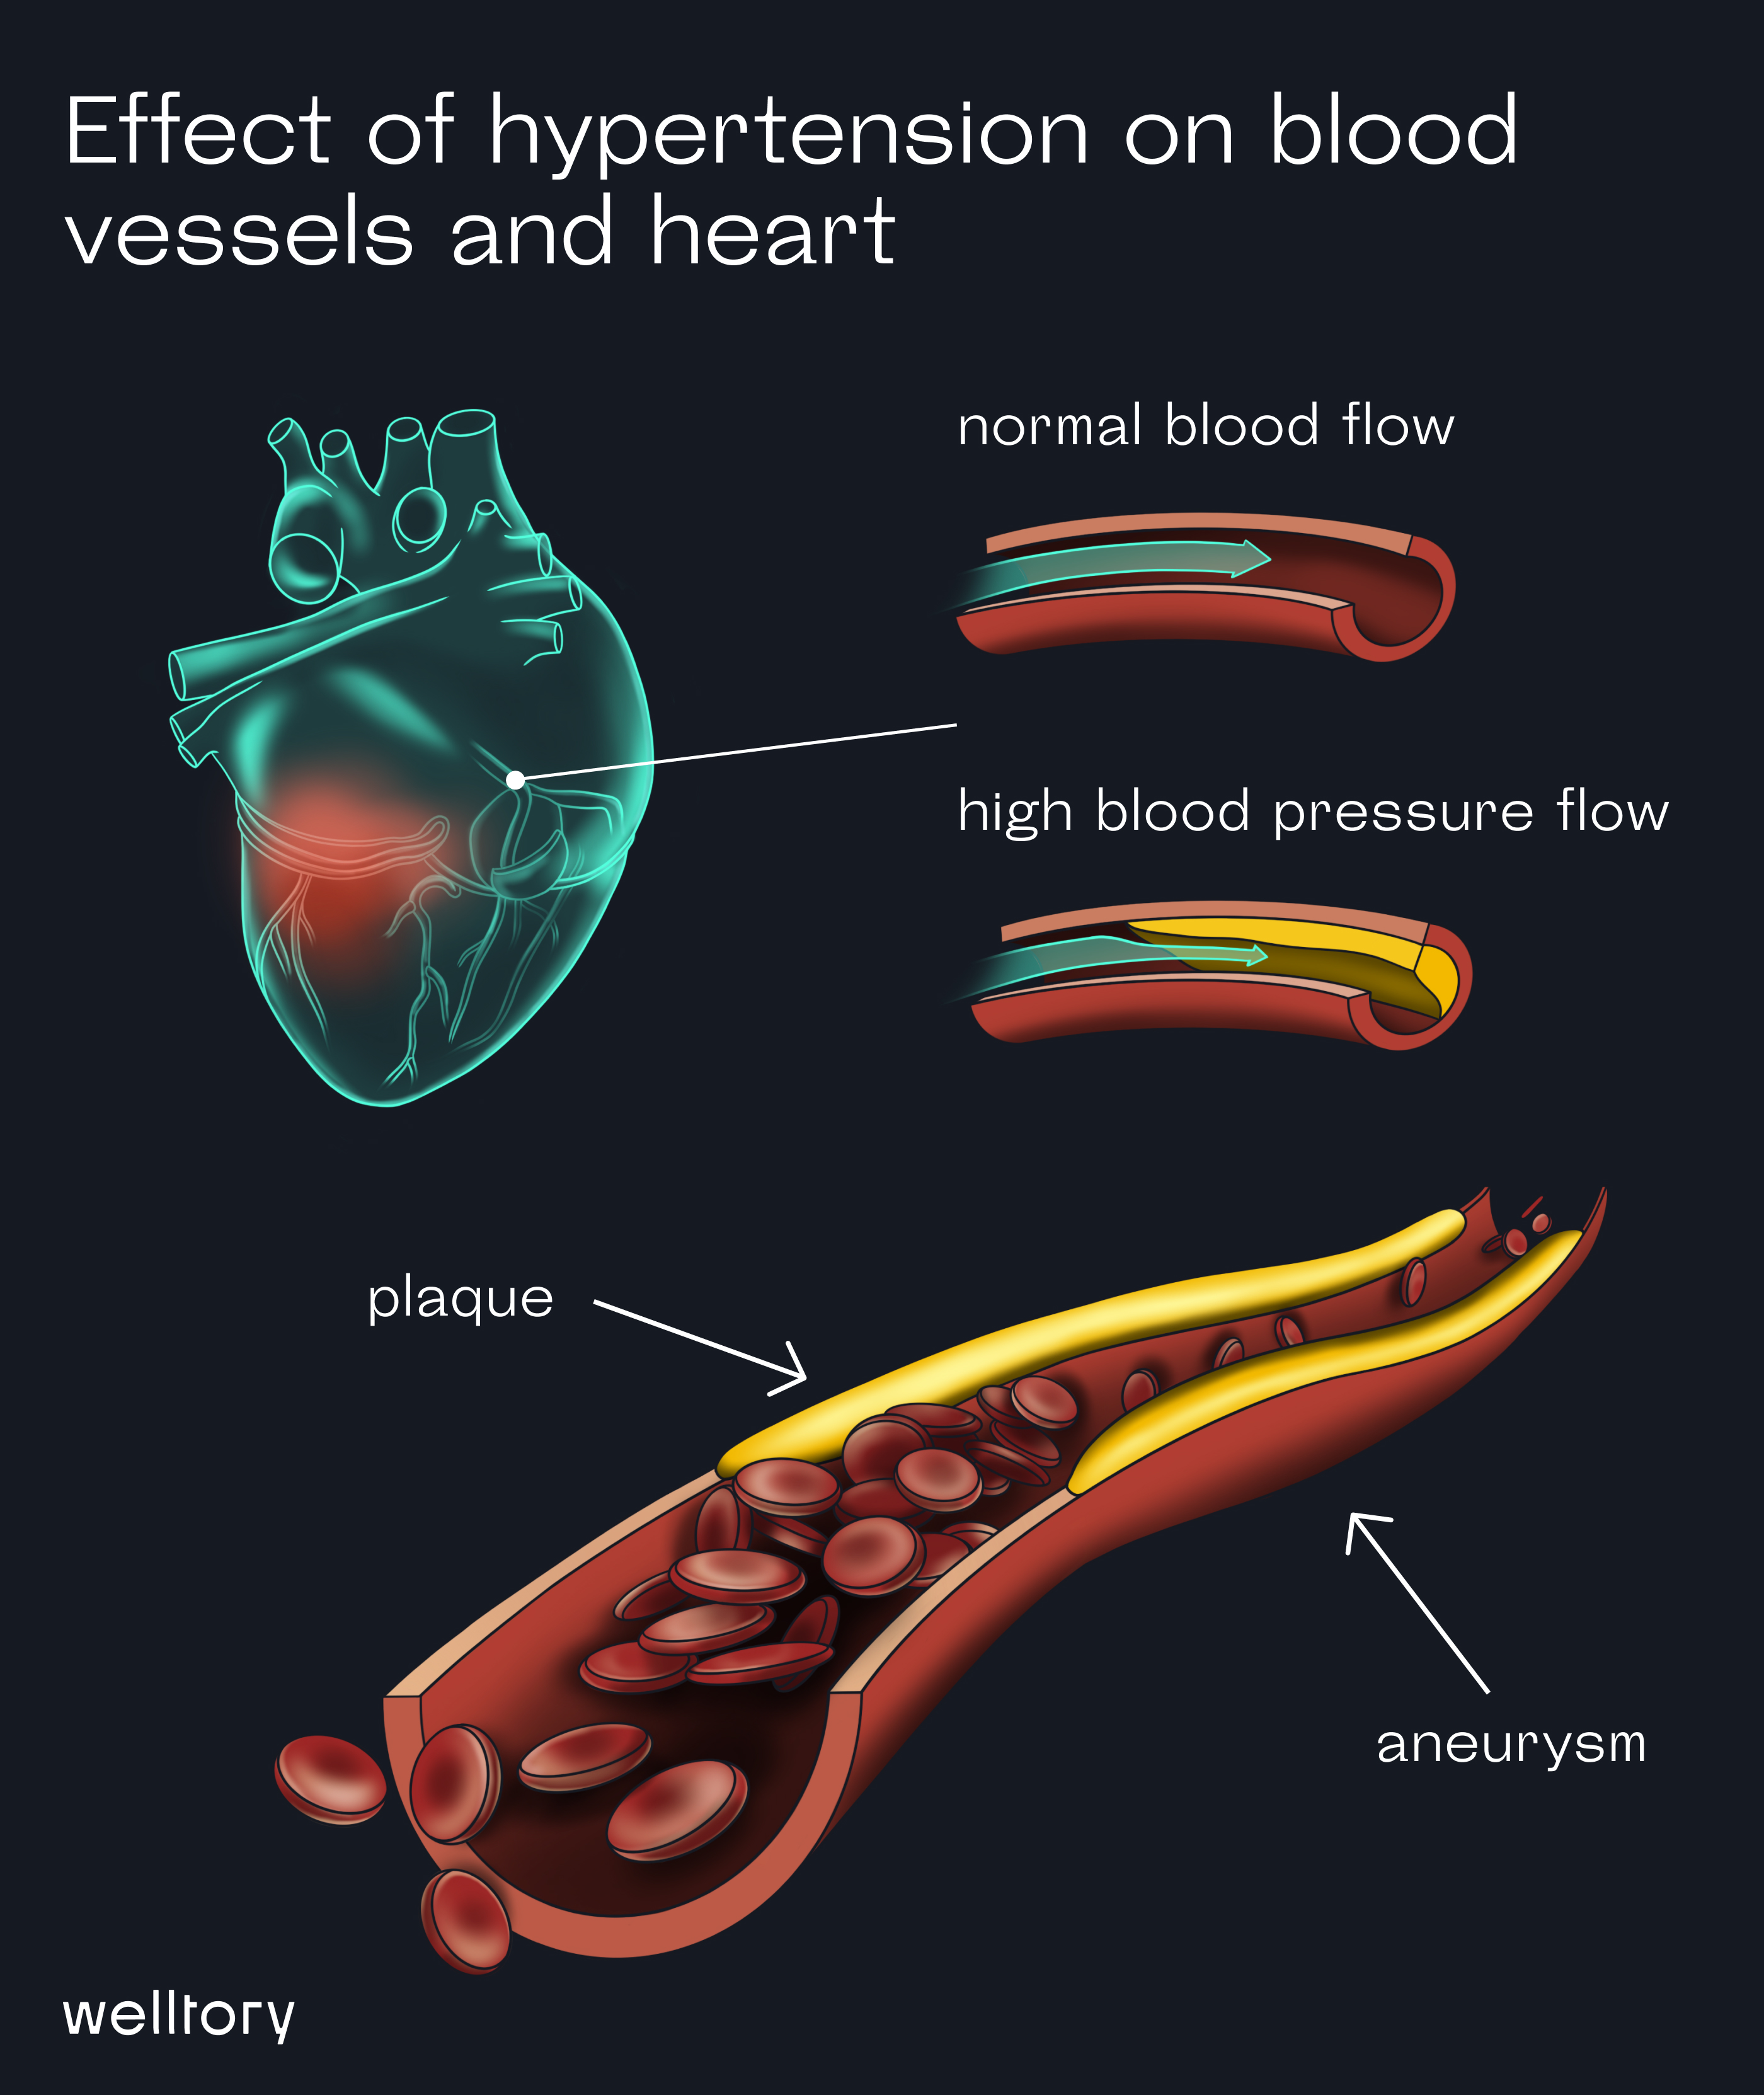 blood flow with hypertension, clogged blood vessel